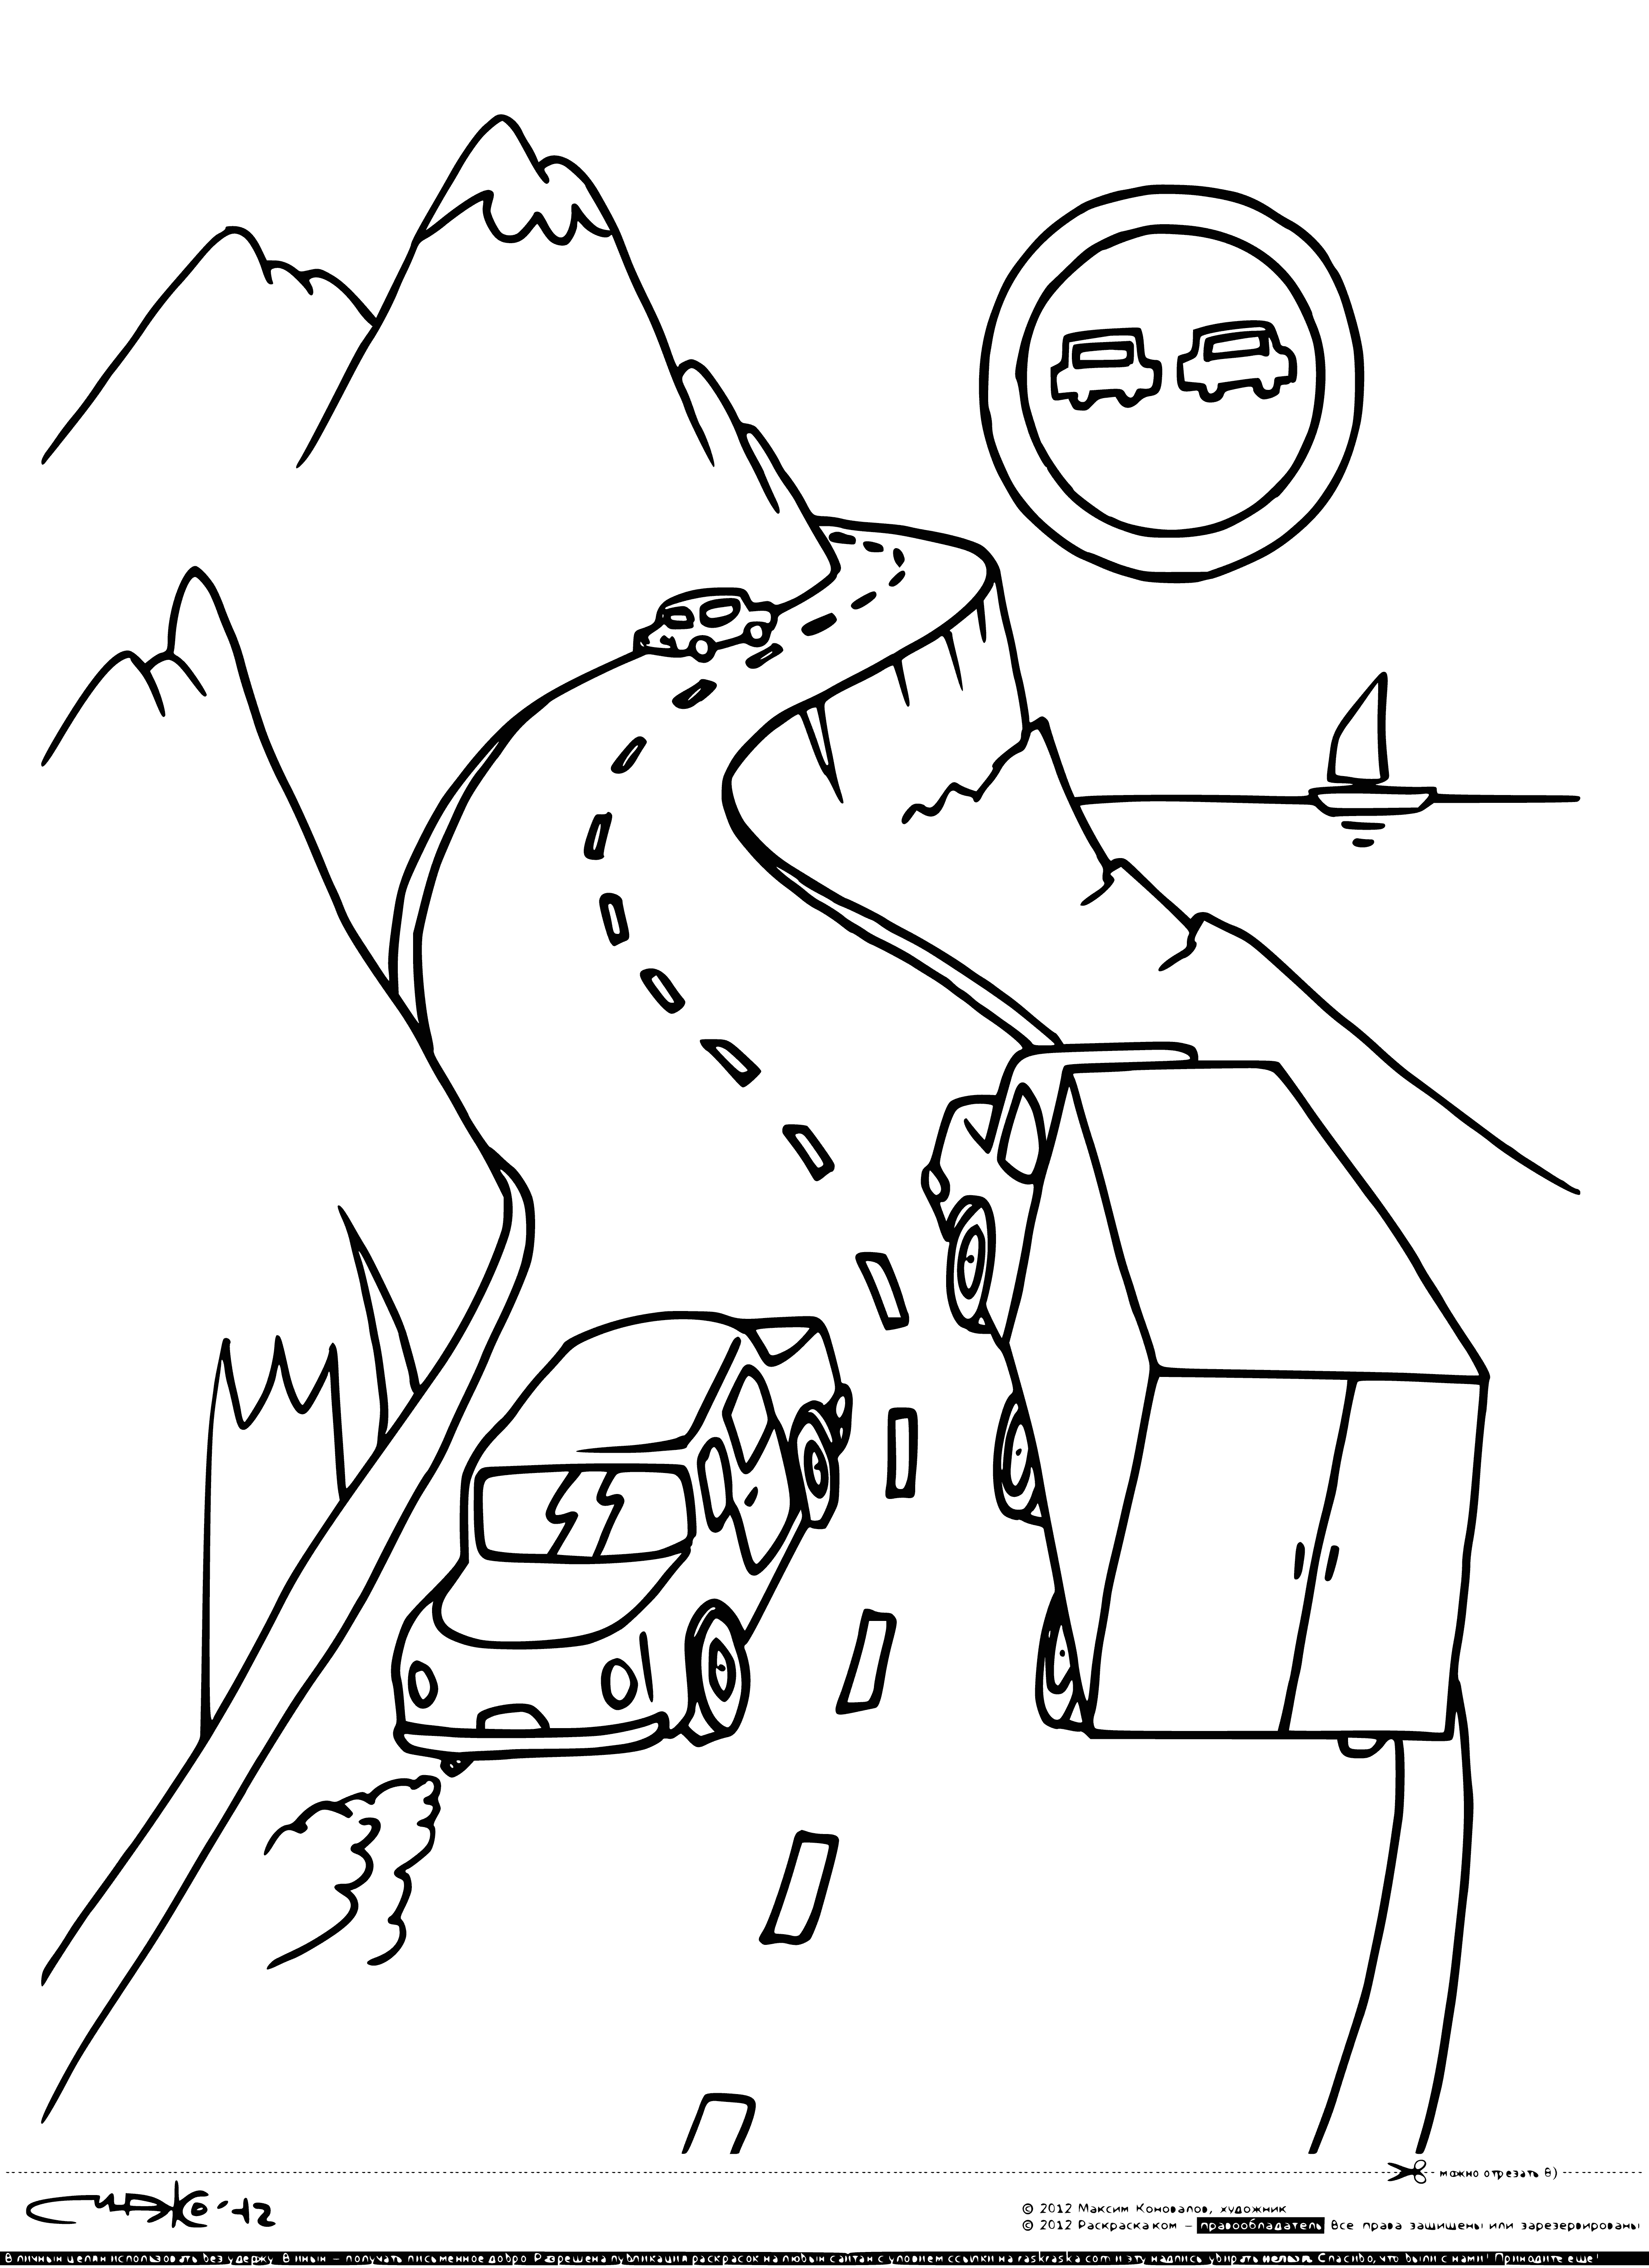 Overtaking prohibited coloring page